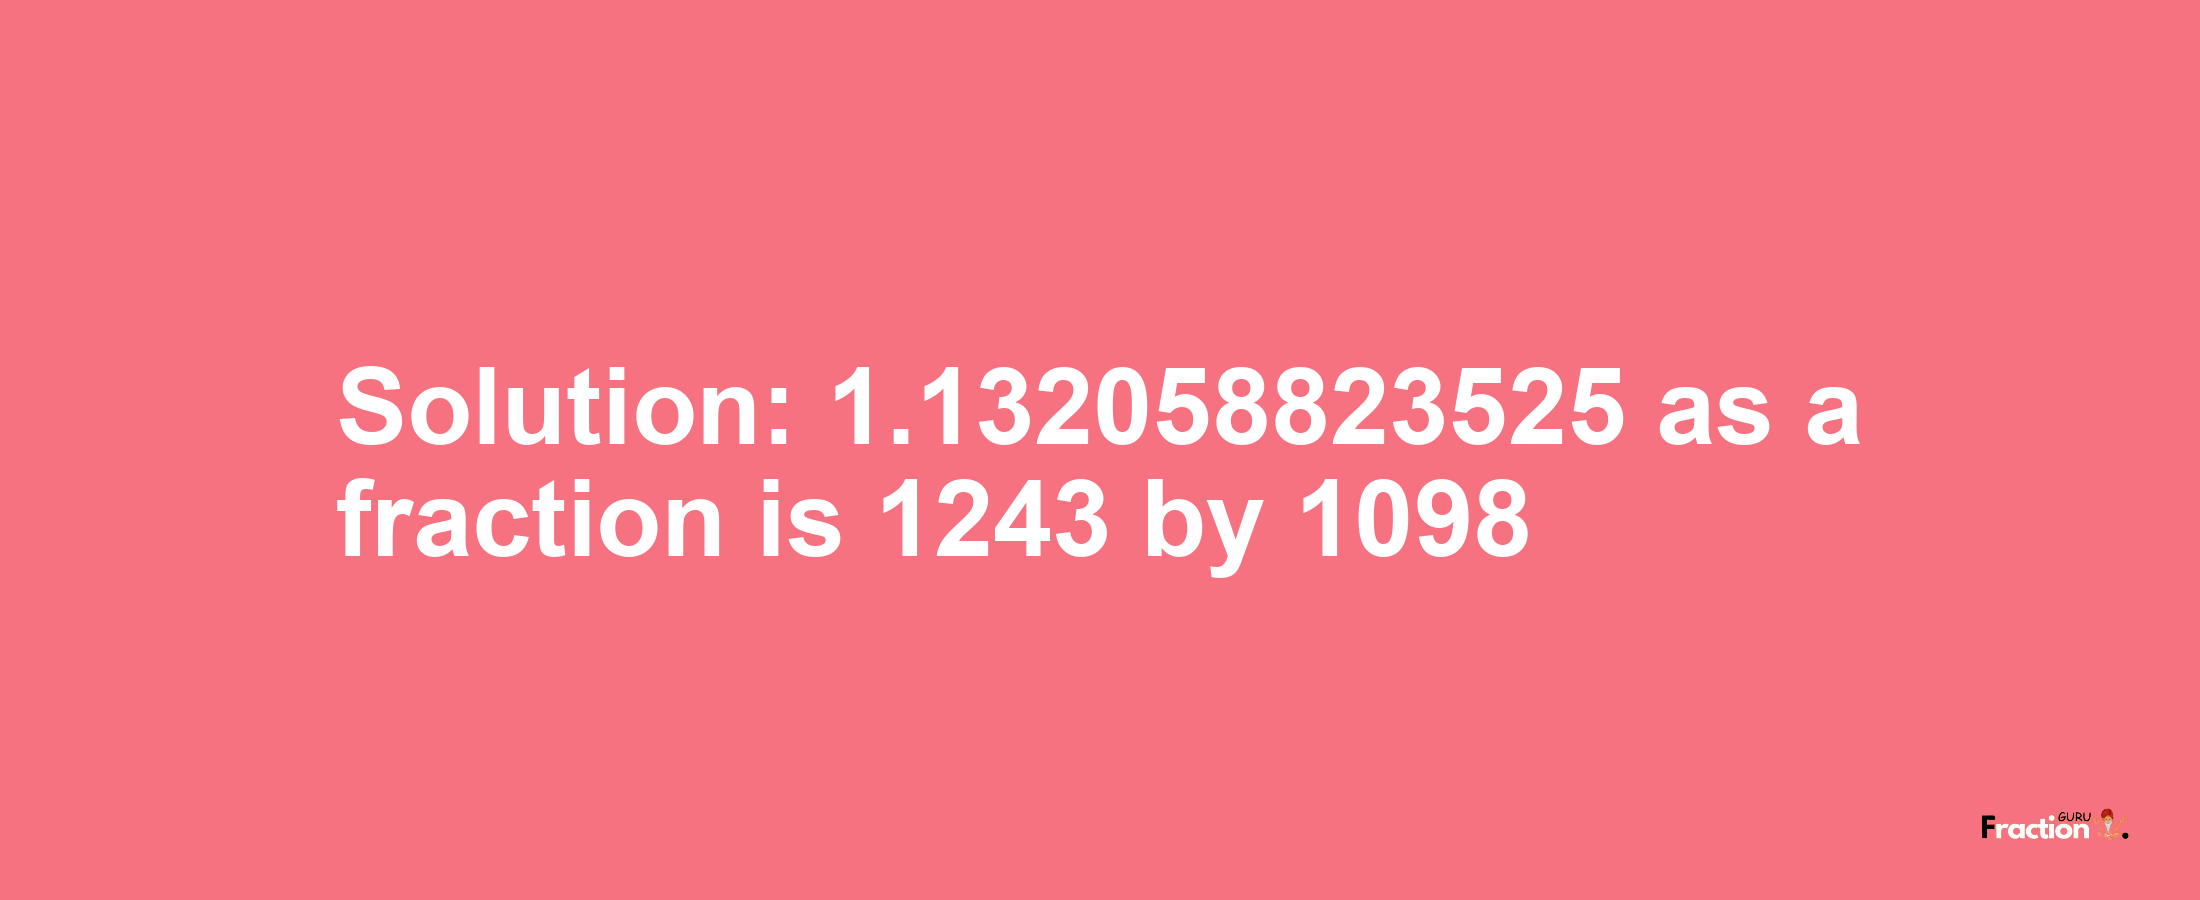 Solution:1.132058823525 as a fraction is 1243/1098